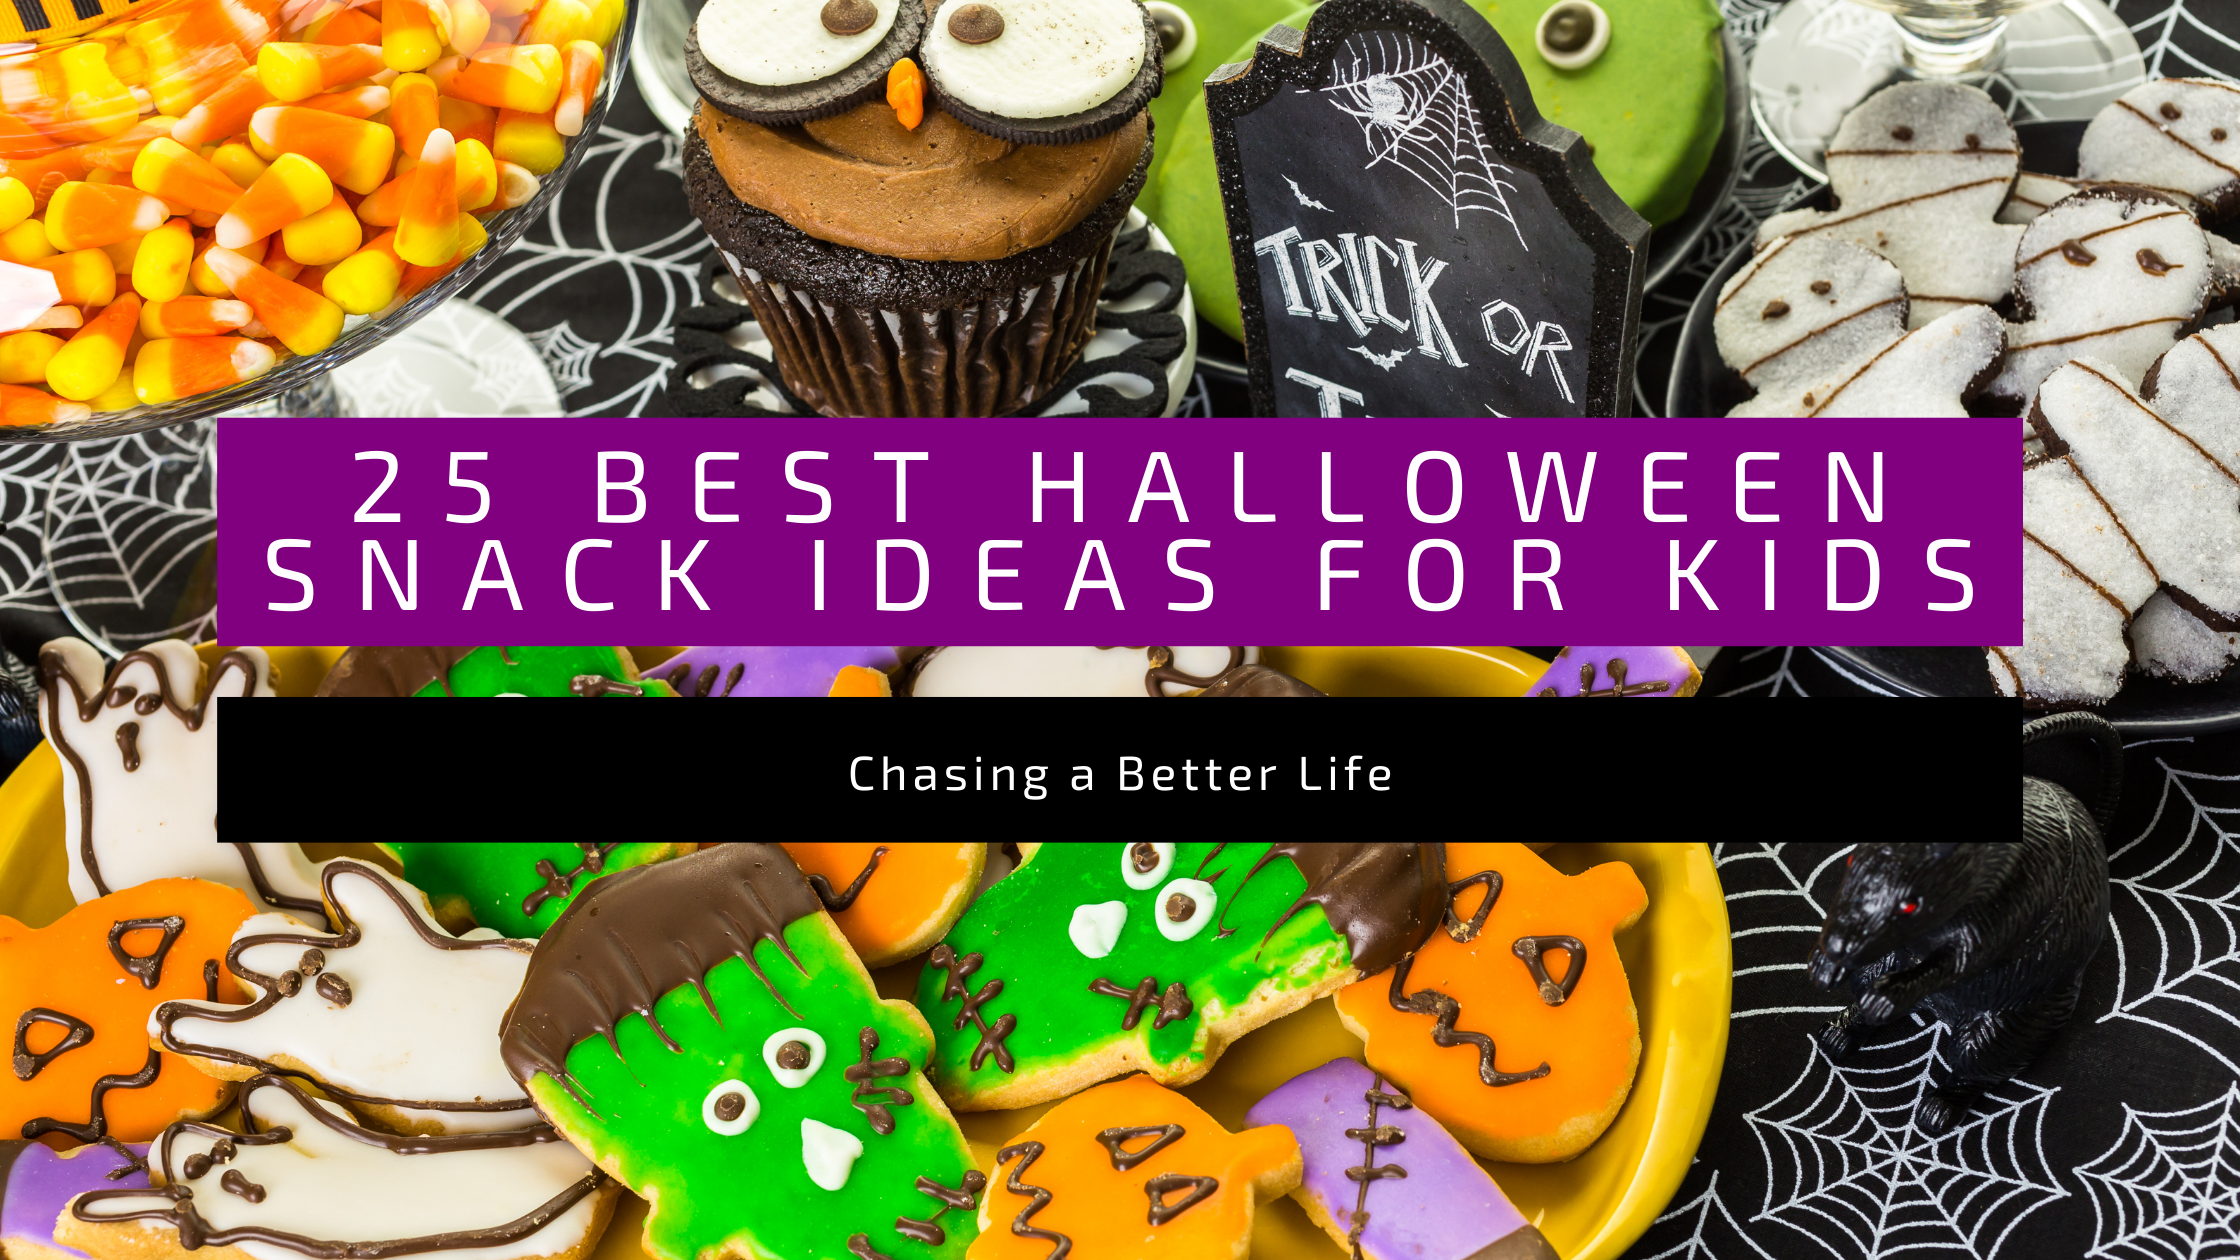 The 25 Best Halloween Snack Ideas for Kids 43